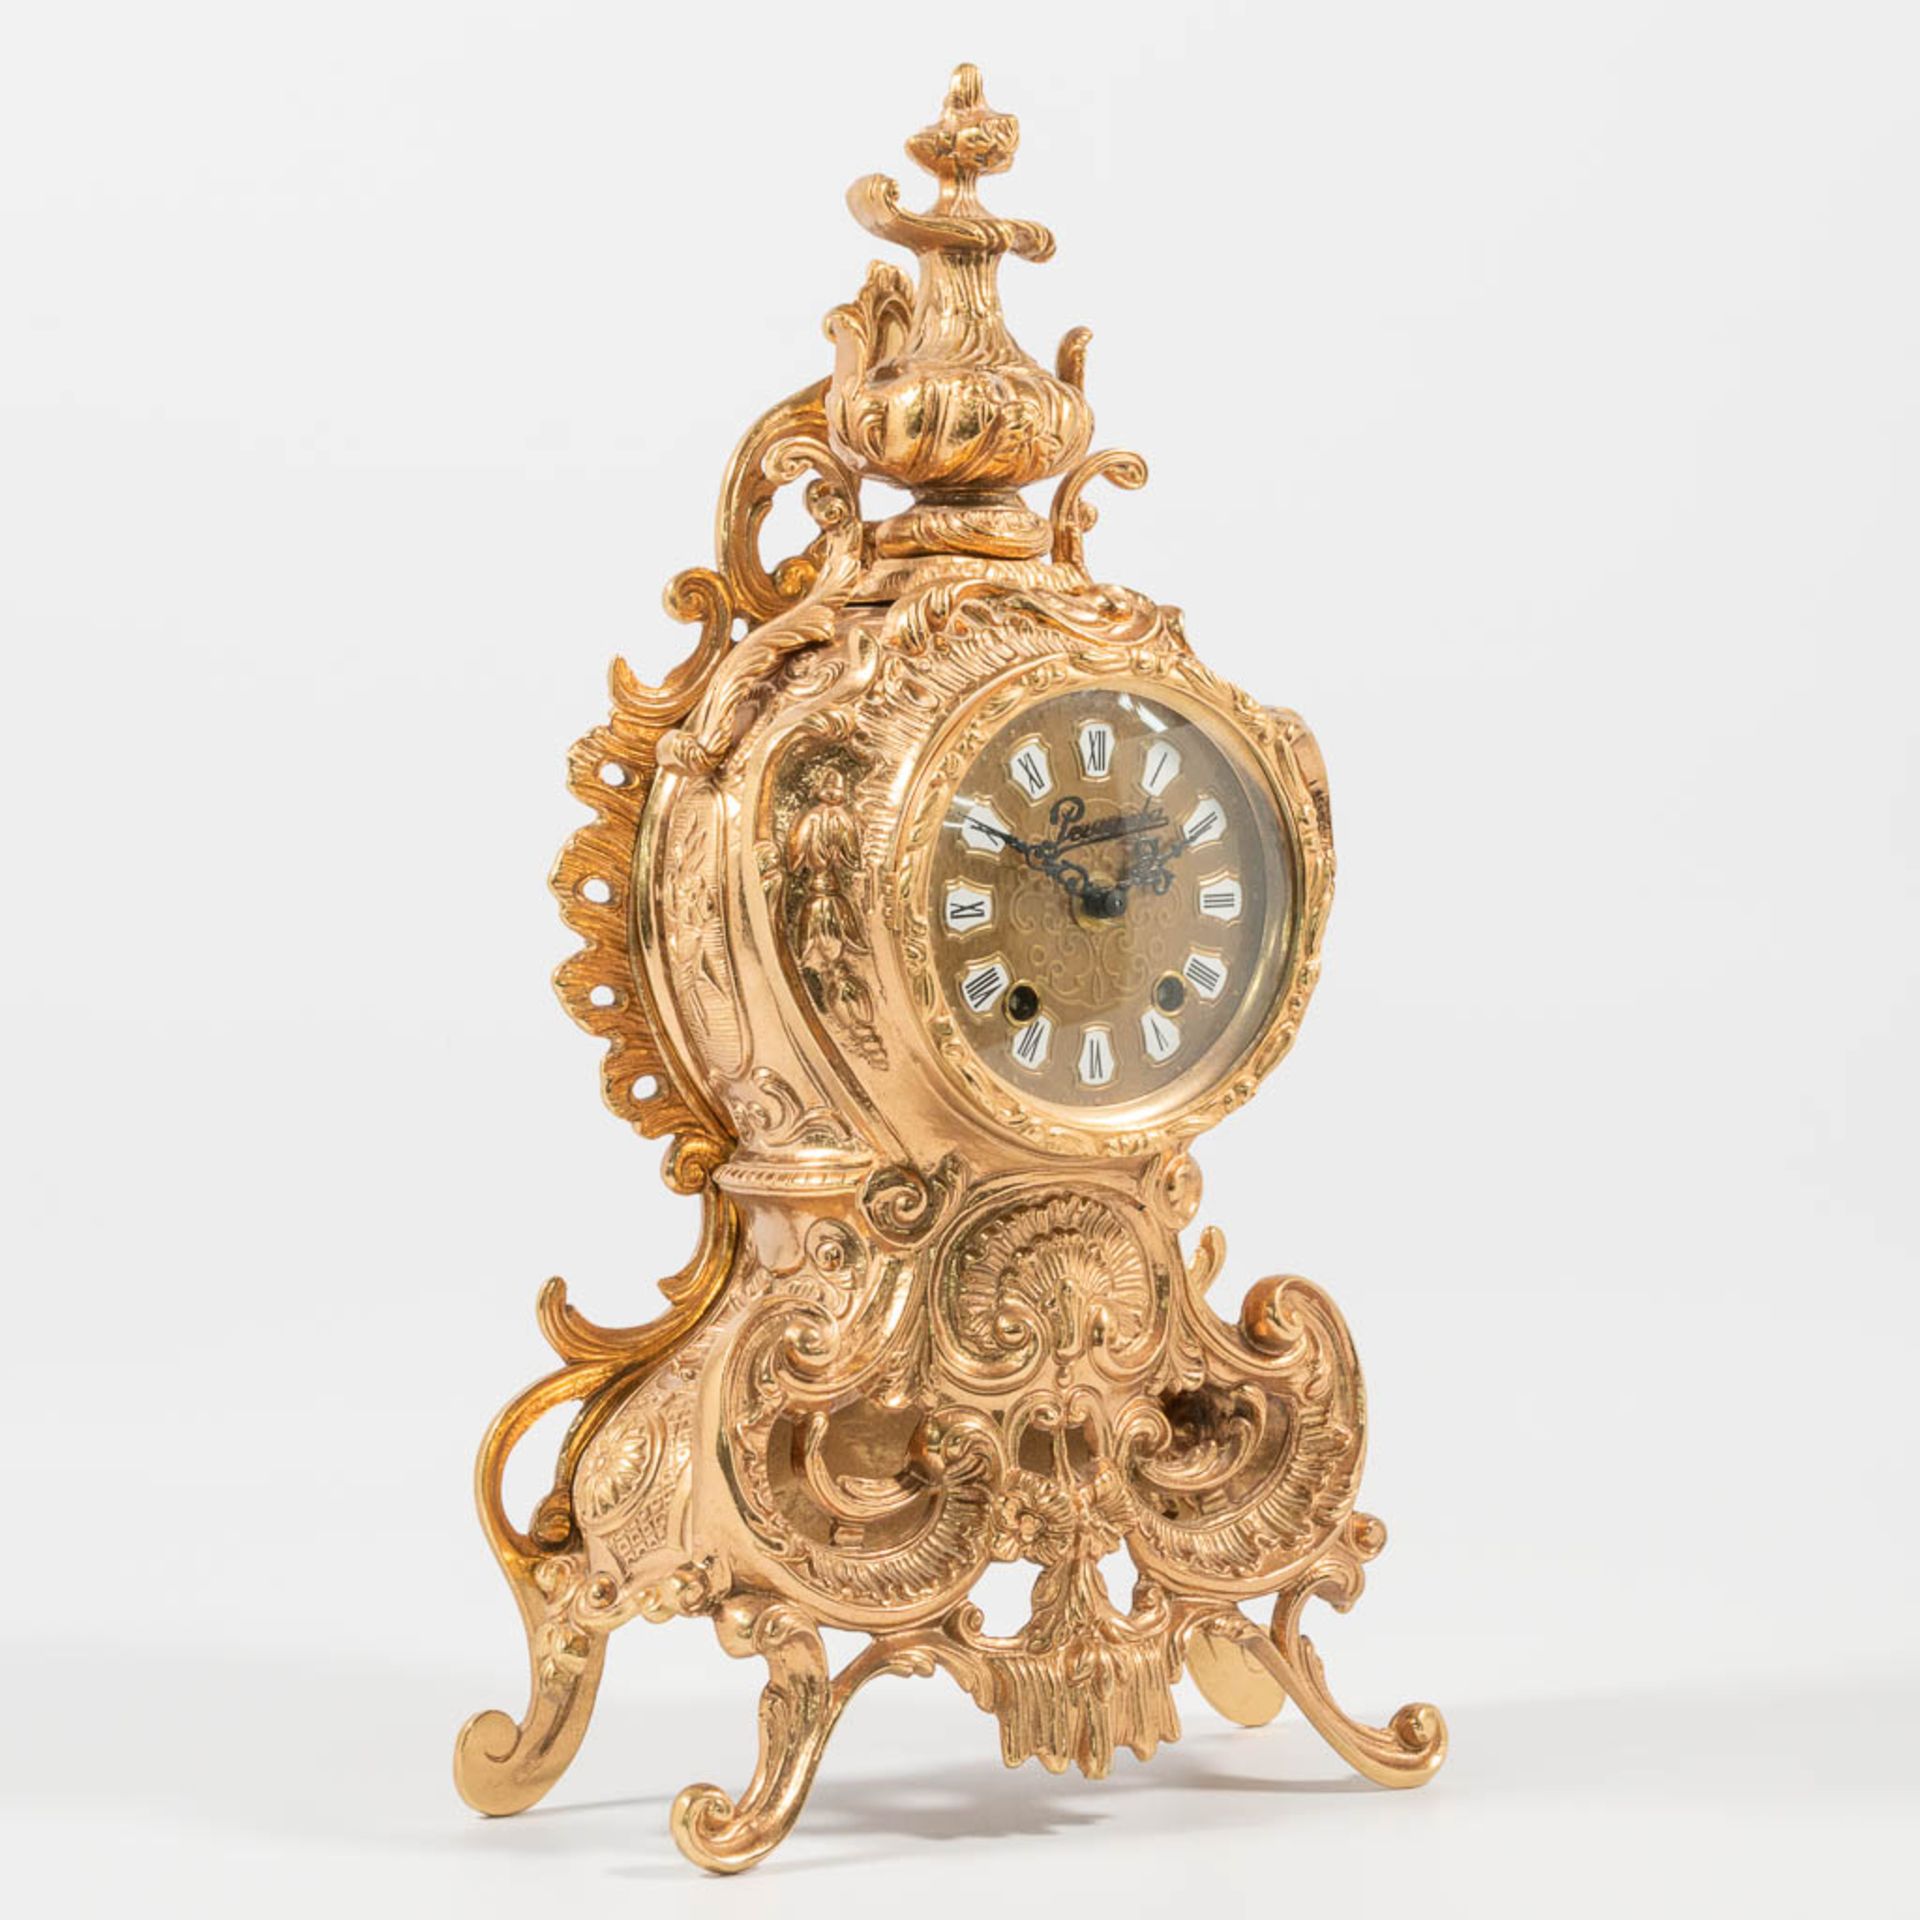 A vintage bronze clock 'Pevanda' with mechanical movement, made around 1970. - Image 13 of 19